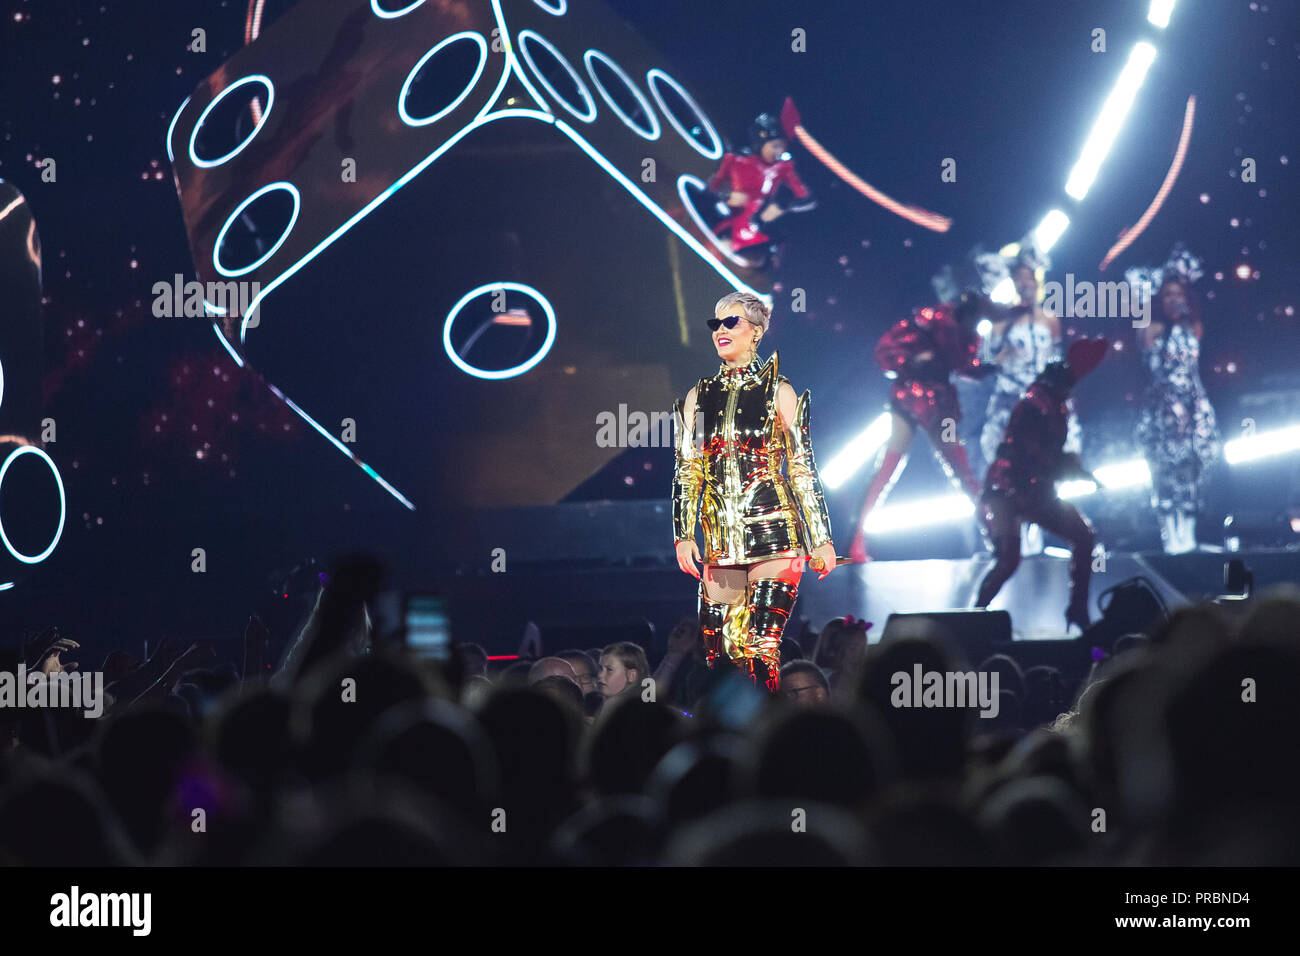 Denmark, Copenhagen - June 8, 2018. The American singer and songwriter Katy  Perry performs a live concert as part of the Witness: The Tour in Royal  Arena in Copenhagen. (Photo credit: Gonzales